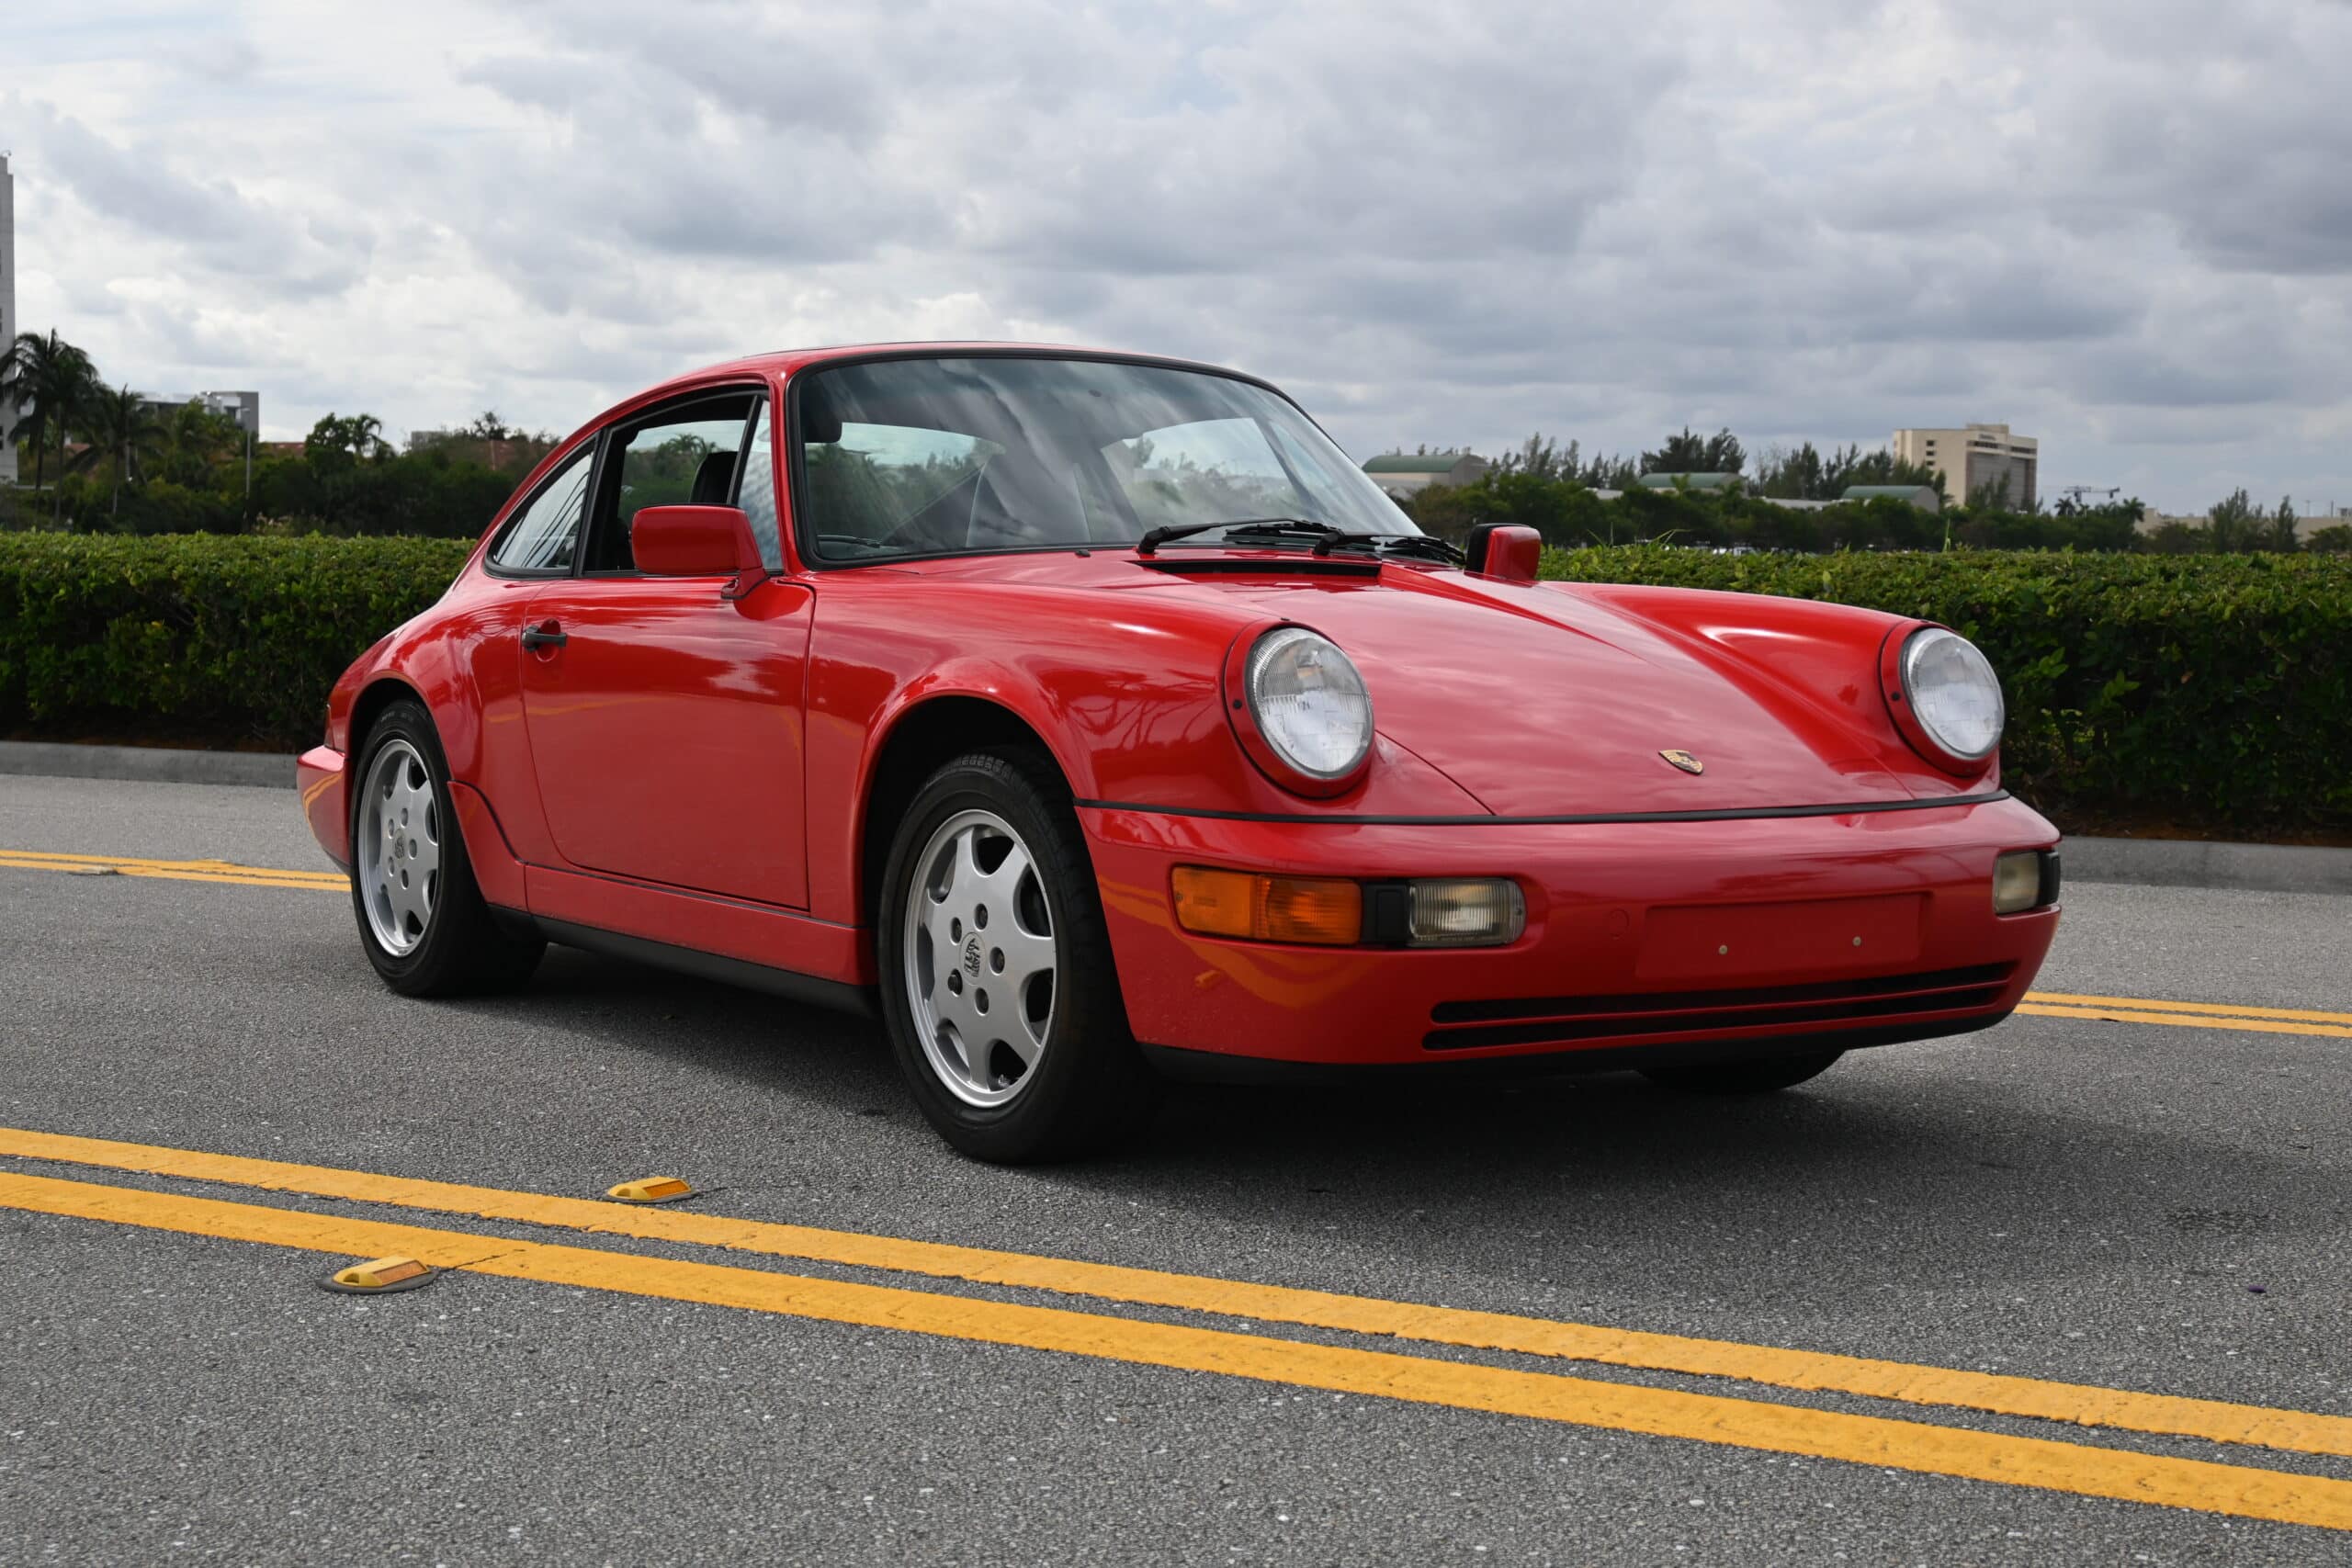 1989 964 Carrera 4, low miles, Original Paint and condition, documented service